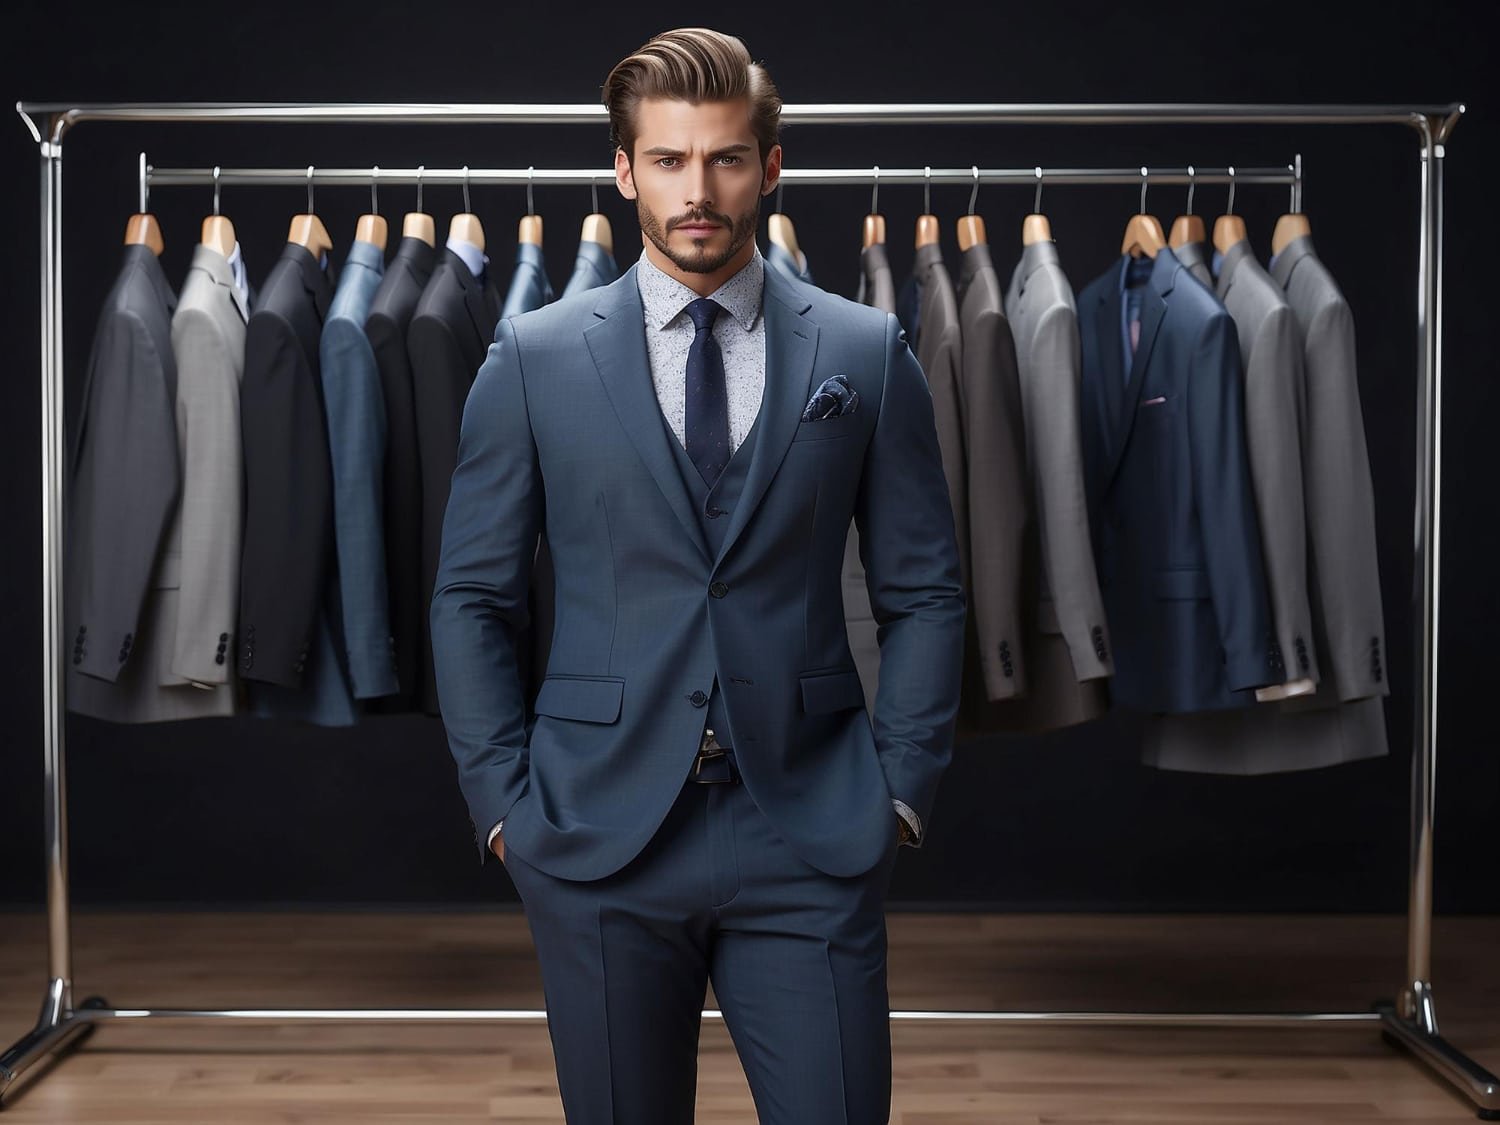 Your Style with Men's Wearhouse: Formalwear and Casual Clothing